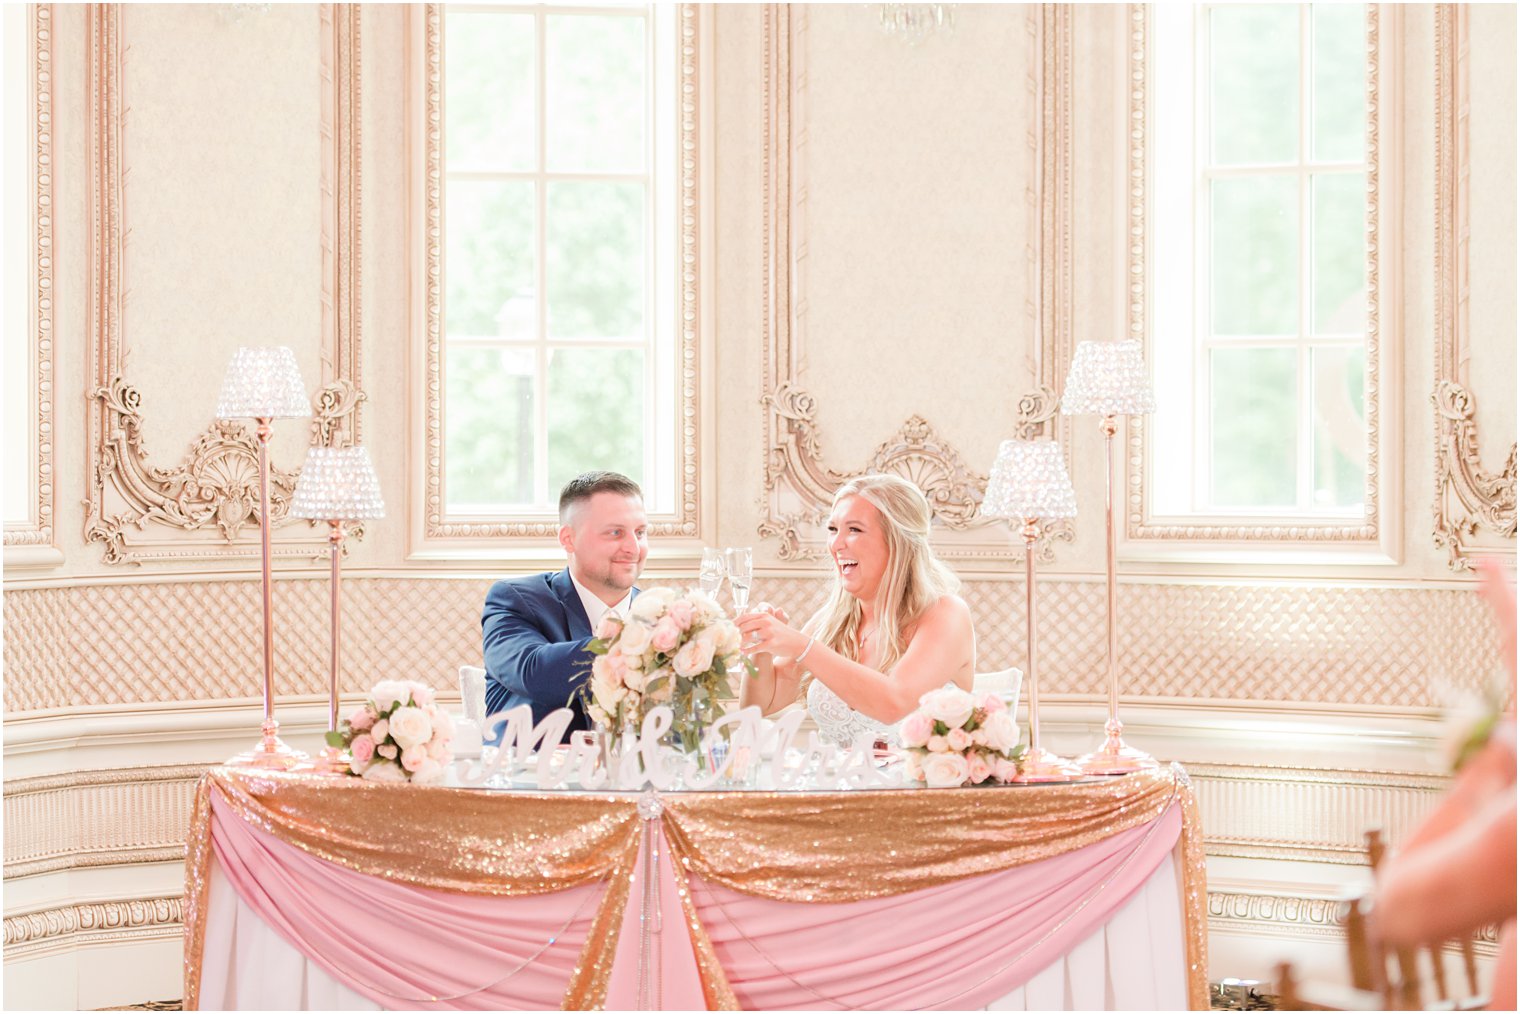 newlyweds toast at sweetheart table with pink and gold decor 